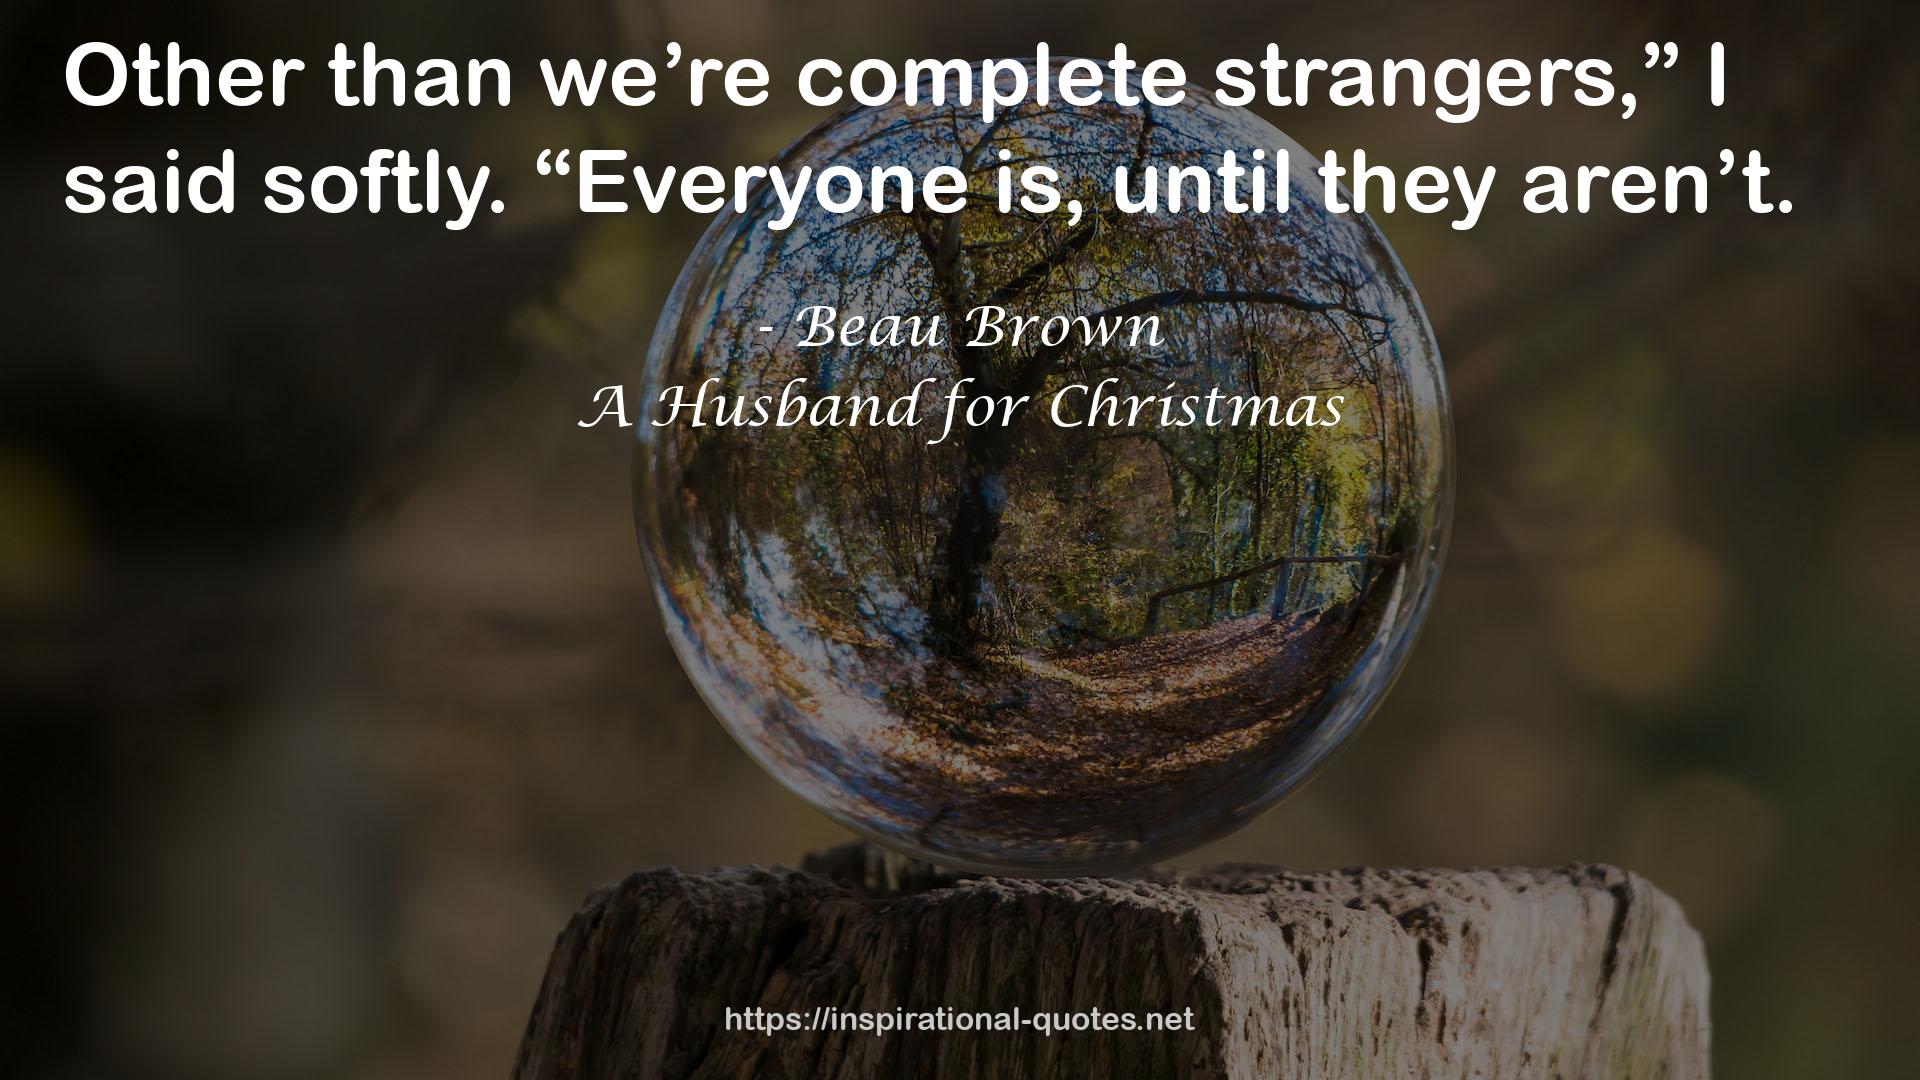 A Husband for Christmas QUOTES